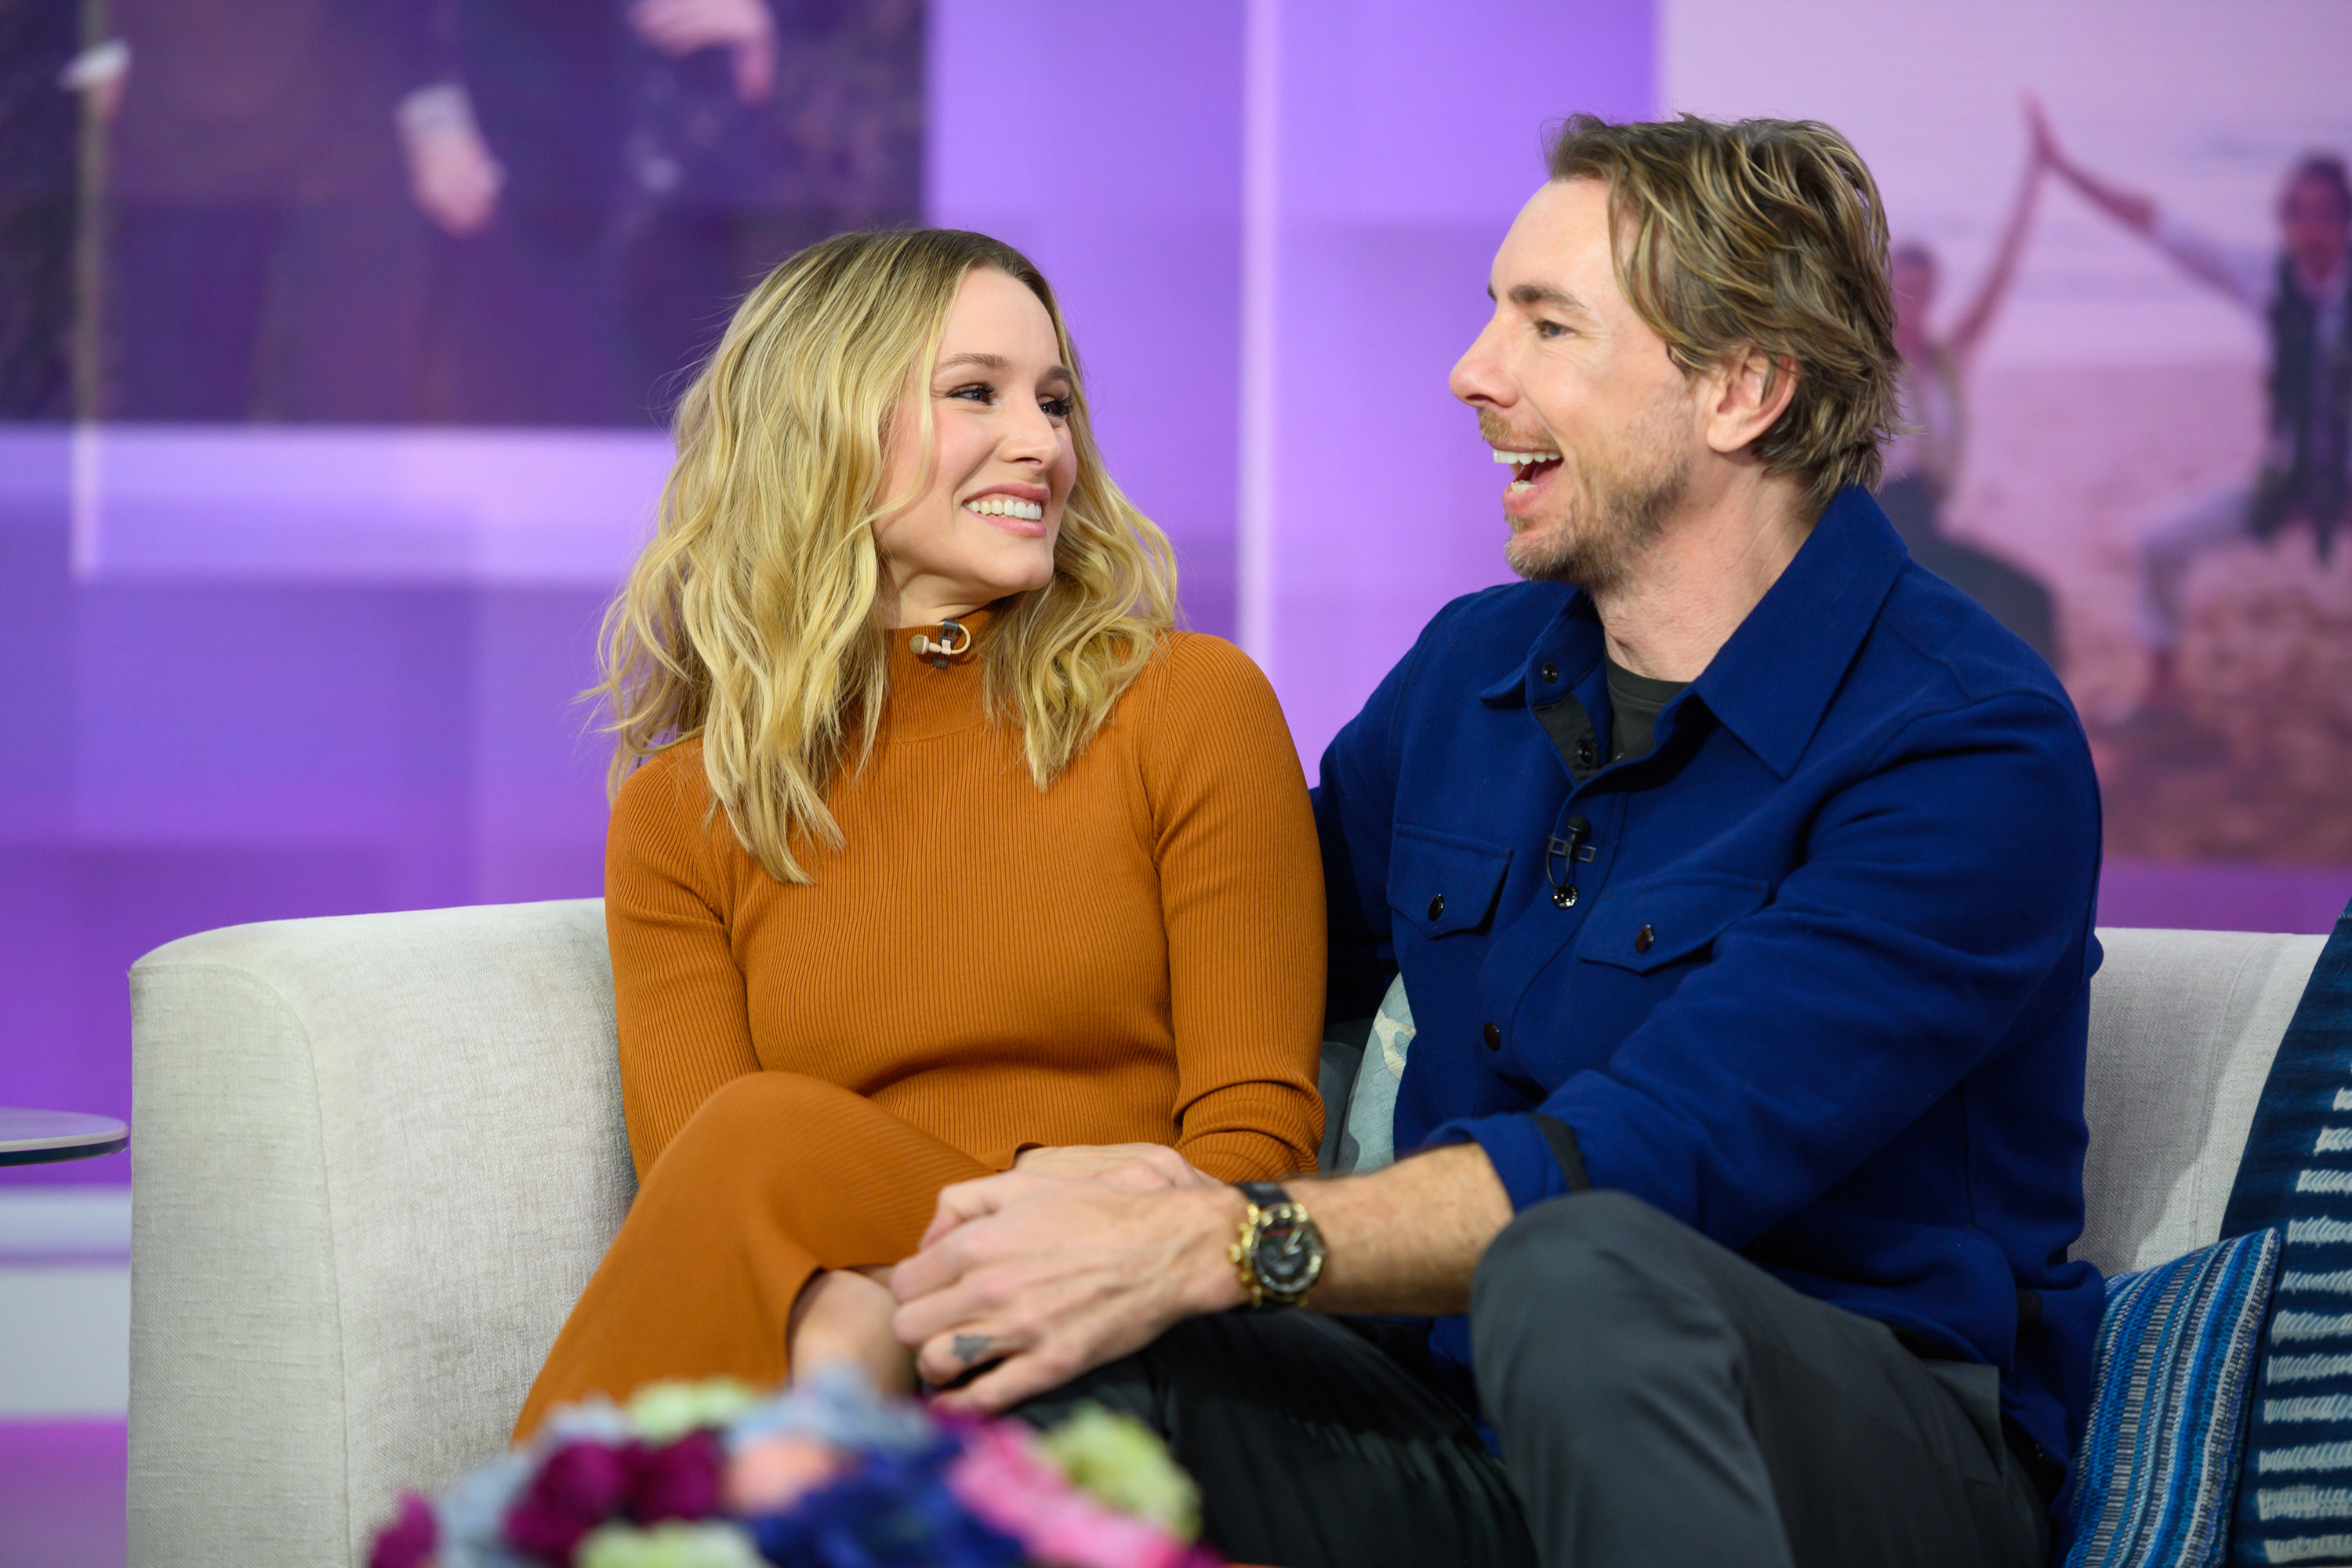 Kristen Bell and Dax Shepard sitting on a couch and laughing